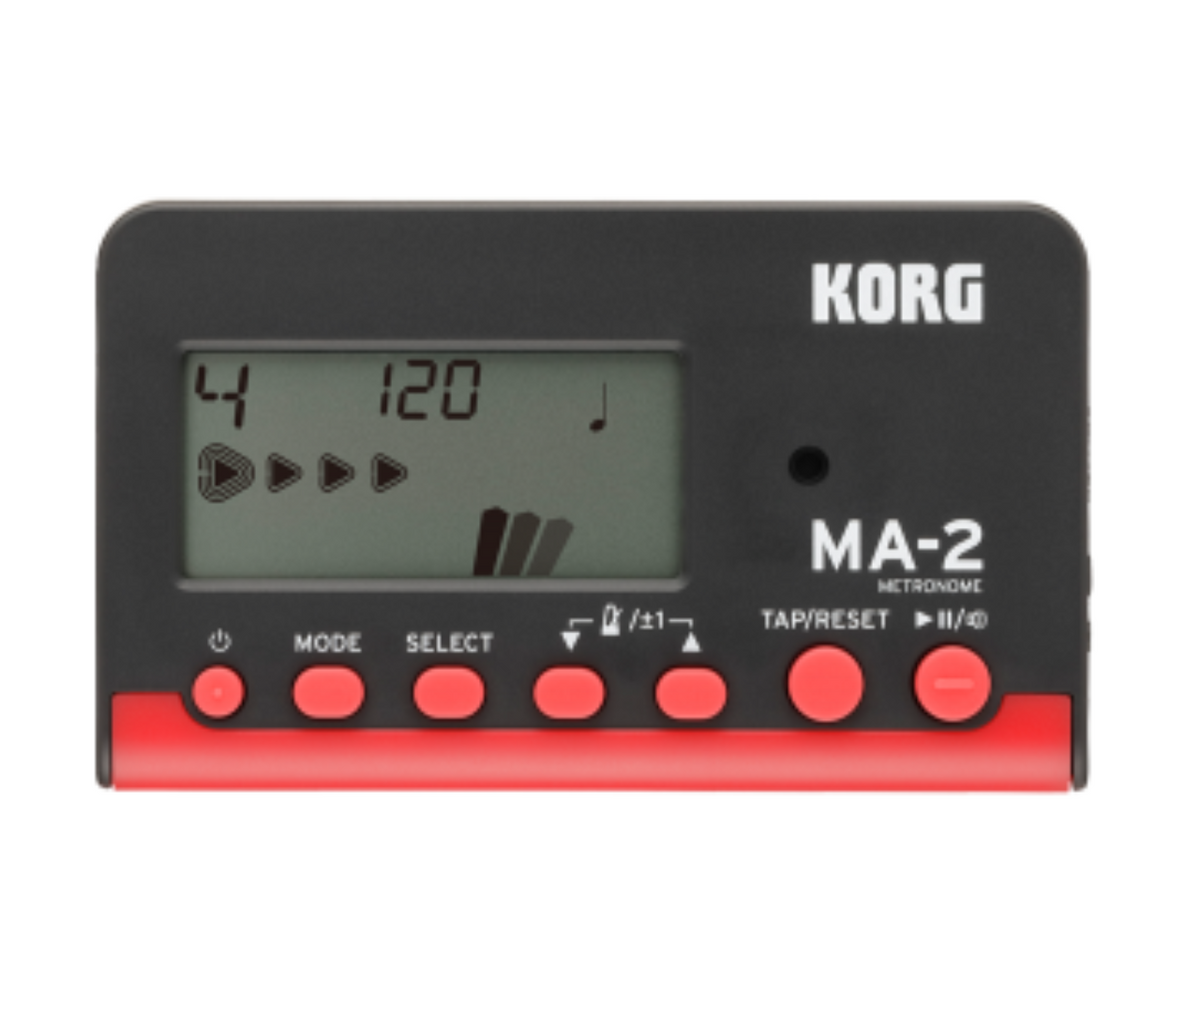 KORG MA-2 Best Metronome MA-2-BKRD (Black Red) Enhanced Volume and Crisp Sound for Easier Detection with Timer Mode and Sound Out Mode